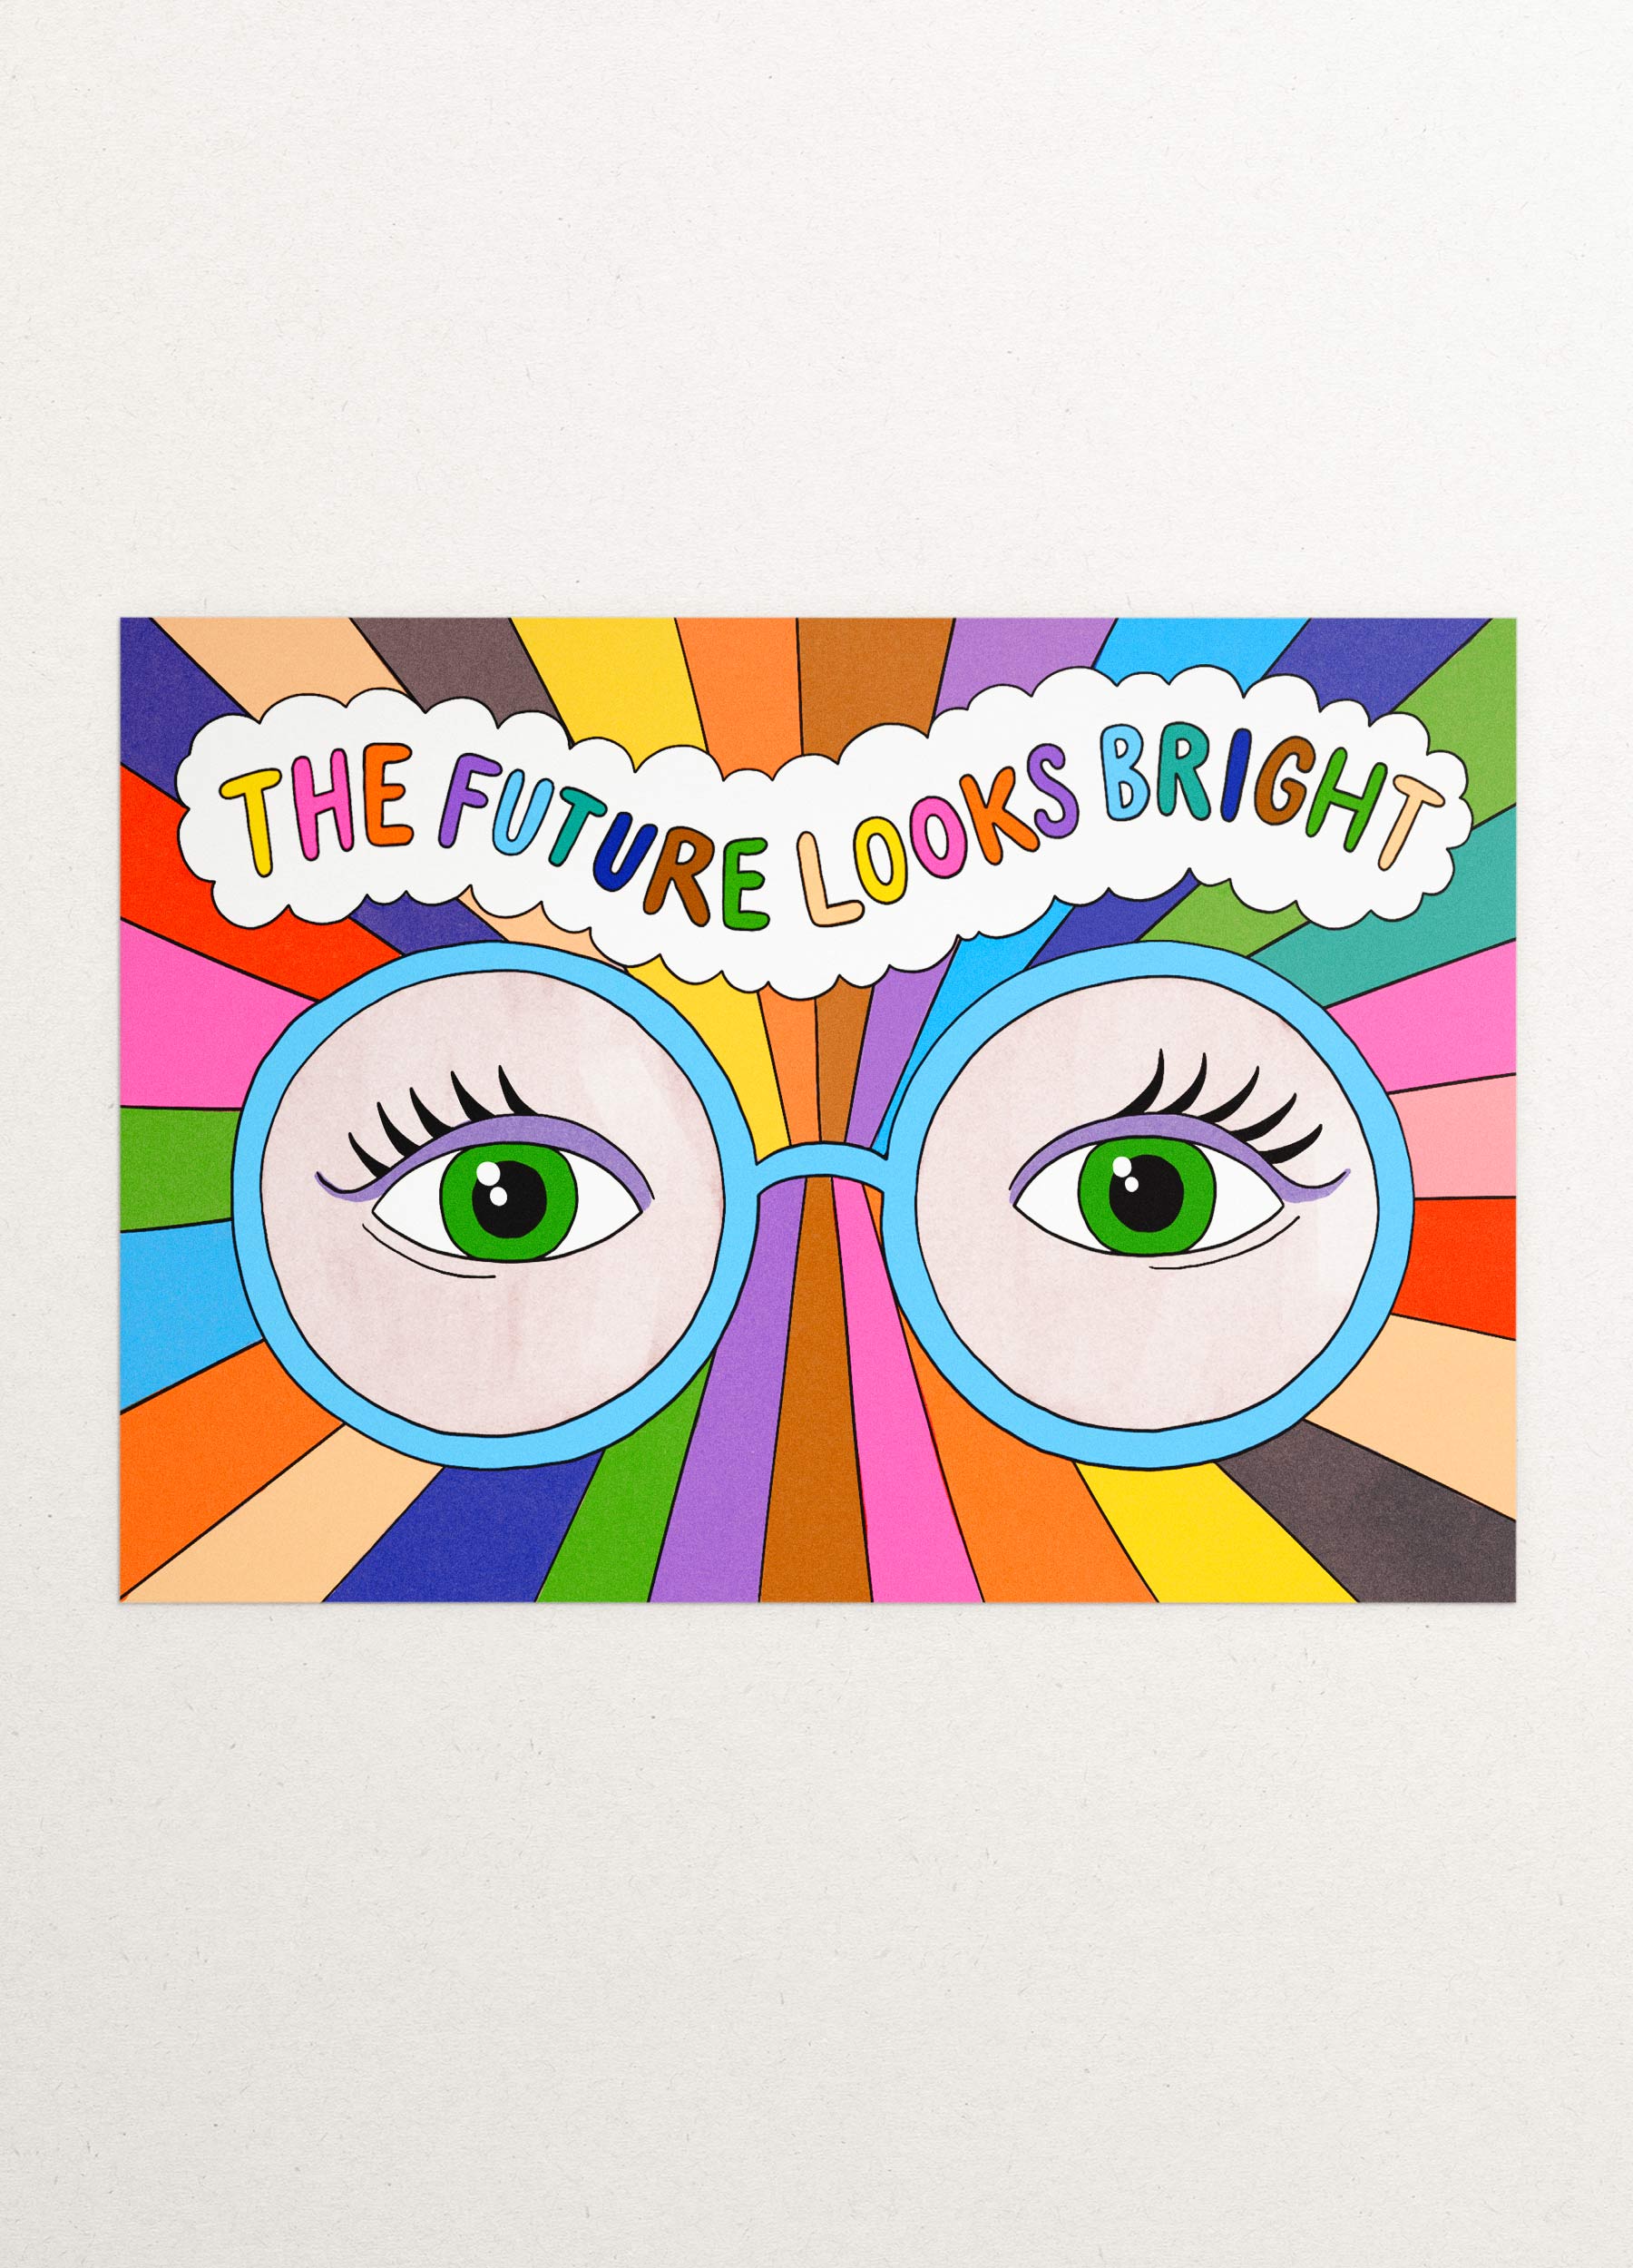 This is an image of a greeting card by Kiosk, that is illustrated by Georgia Perry. The card has an illustration of a pair of green eyes with colorful rays emanating from them. The rays are in various colors such as orange, pink, blue, green, and yellow. Above the eyes, there is a cloud with the text “The future looks bright” written in blue. The background is white and the illustration has a cartoon-like style.